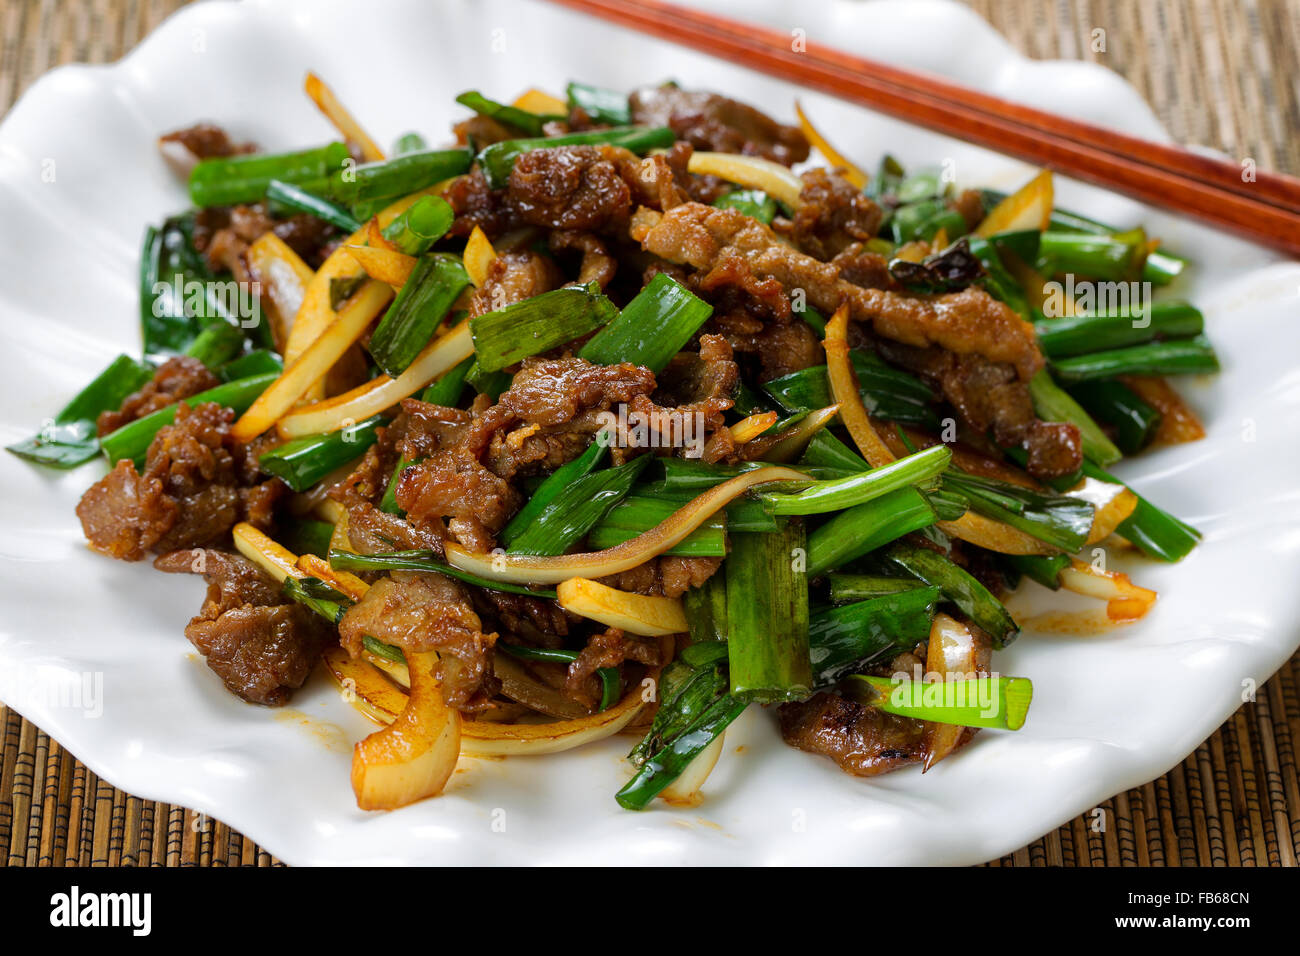 Close up view of beef and green onions in white plate with bamboo mat underneath. Stock Photo